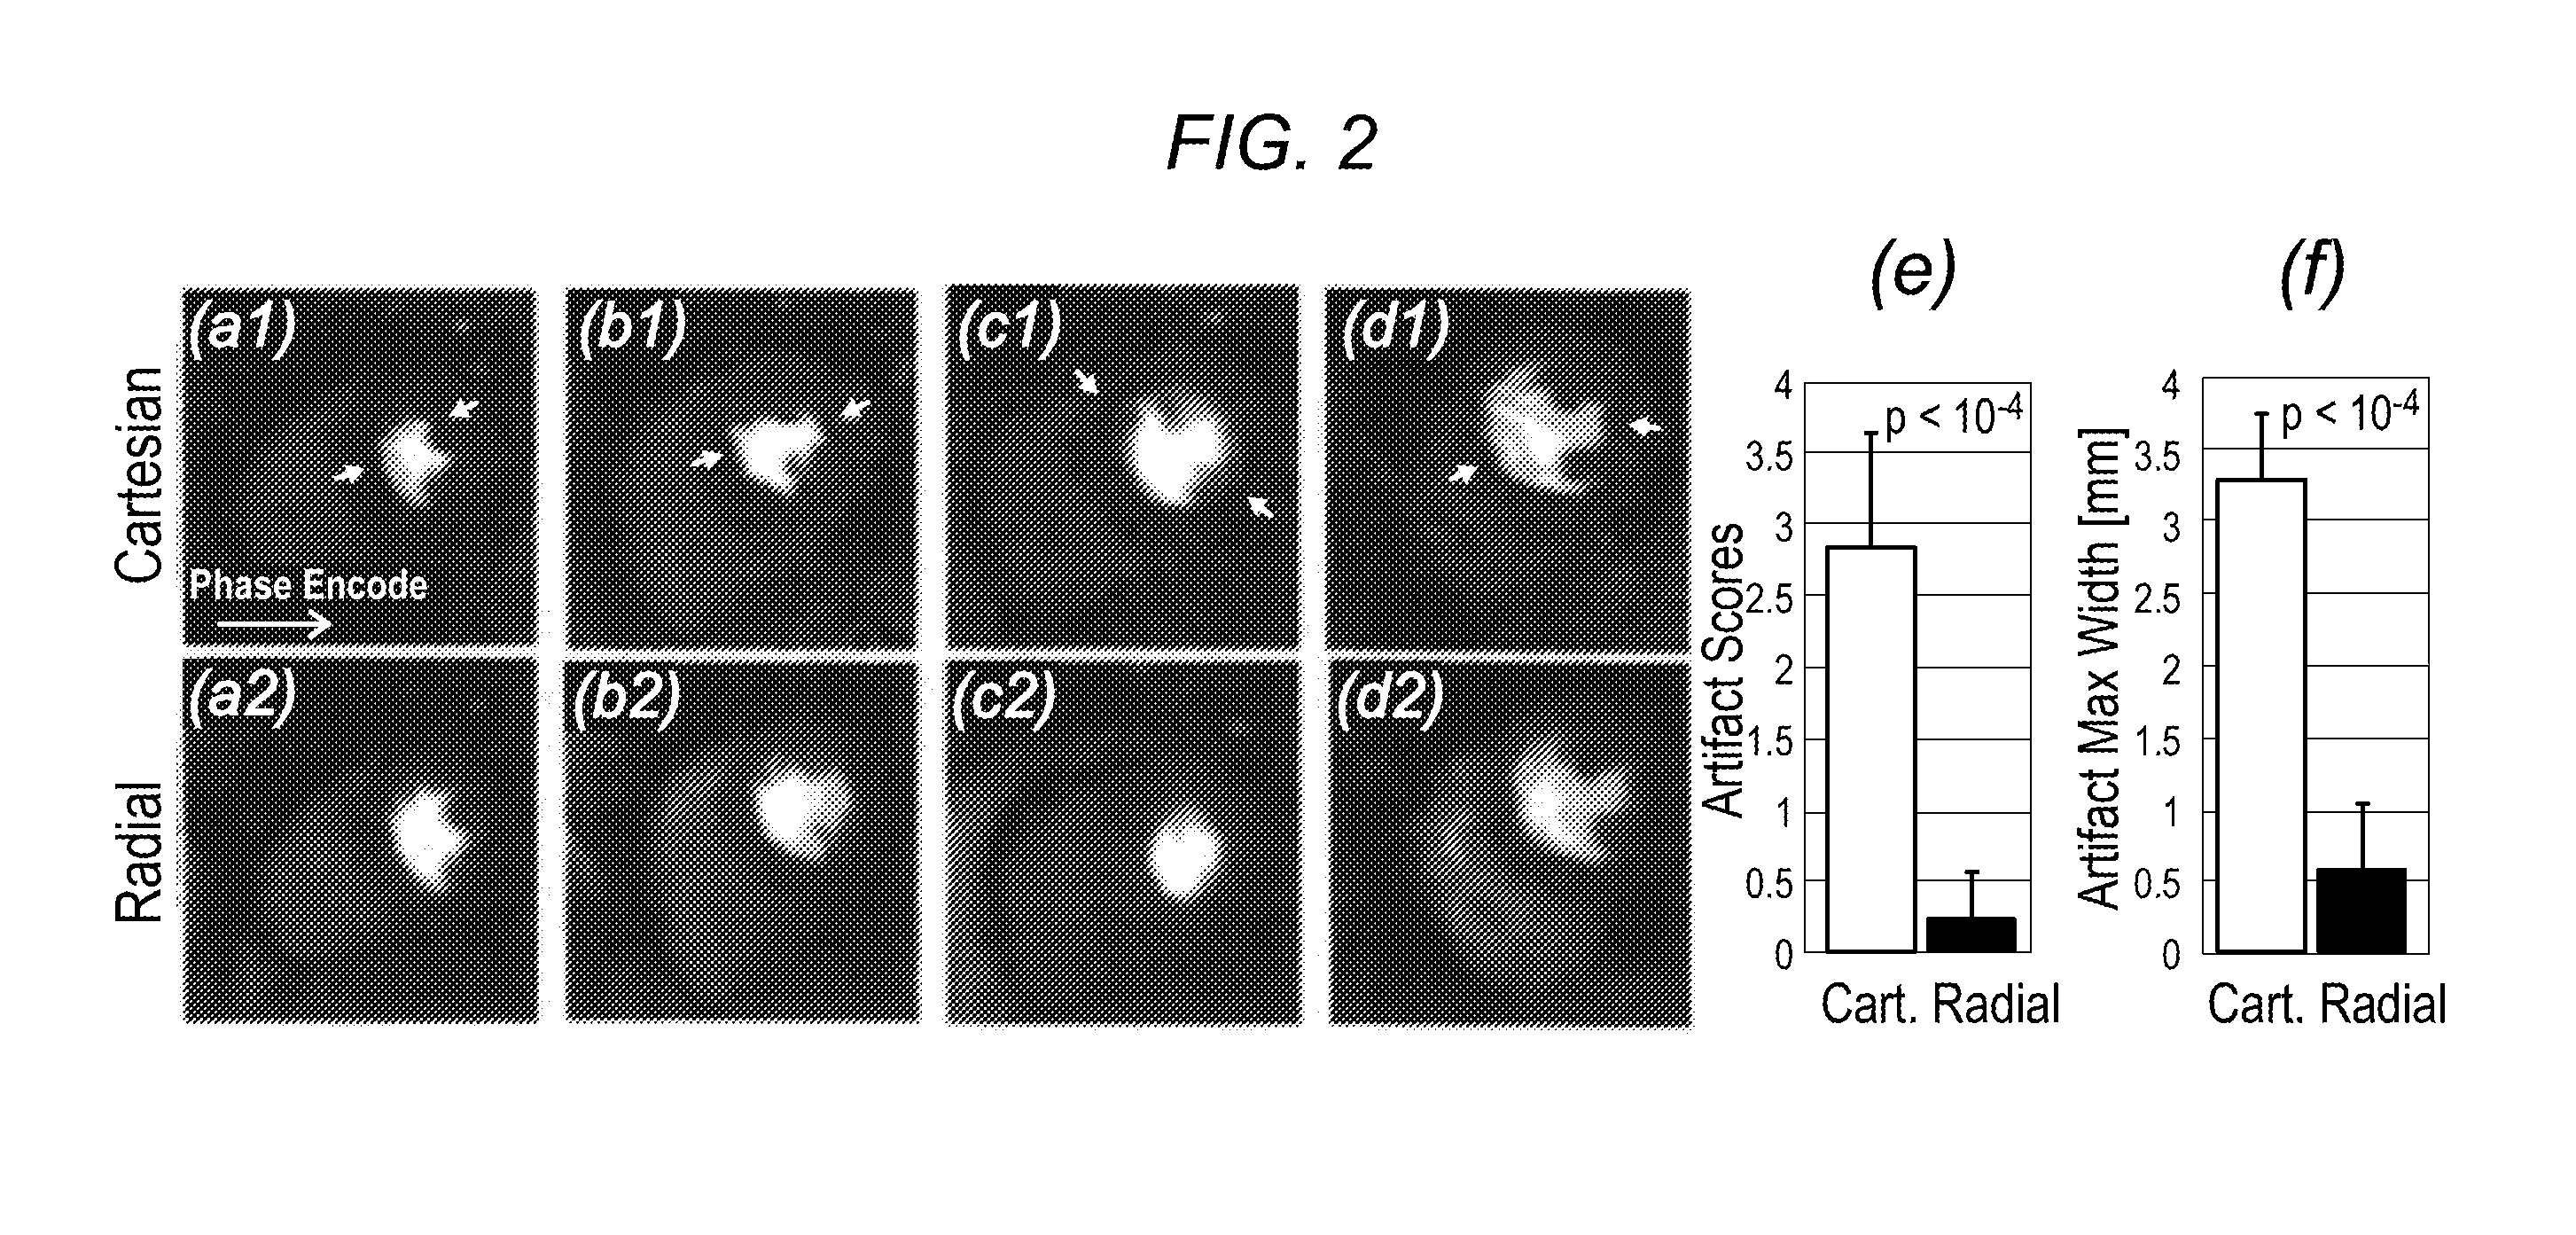 Systems and methods for myocardial perfusion MRI without the need for ECG gating and additional systems and methods for improved cardiac imaging